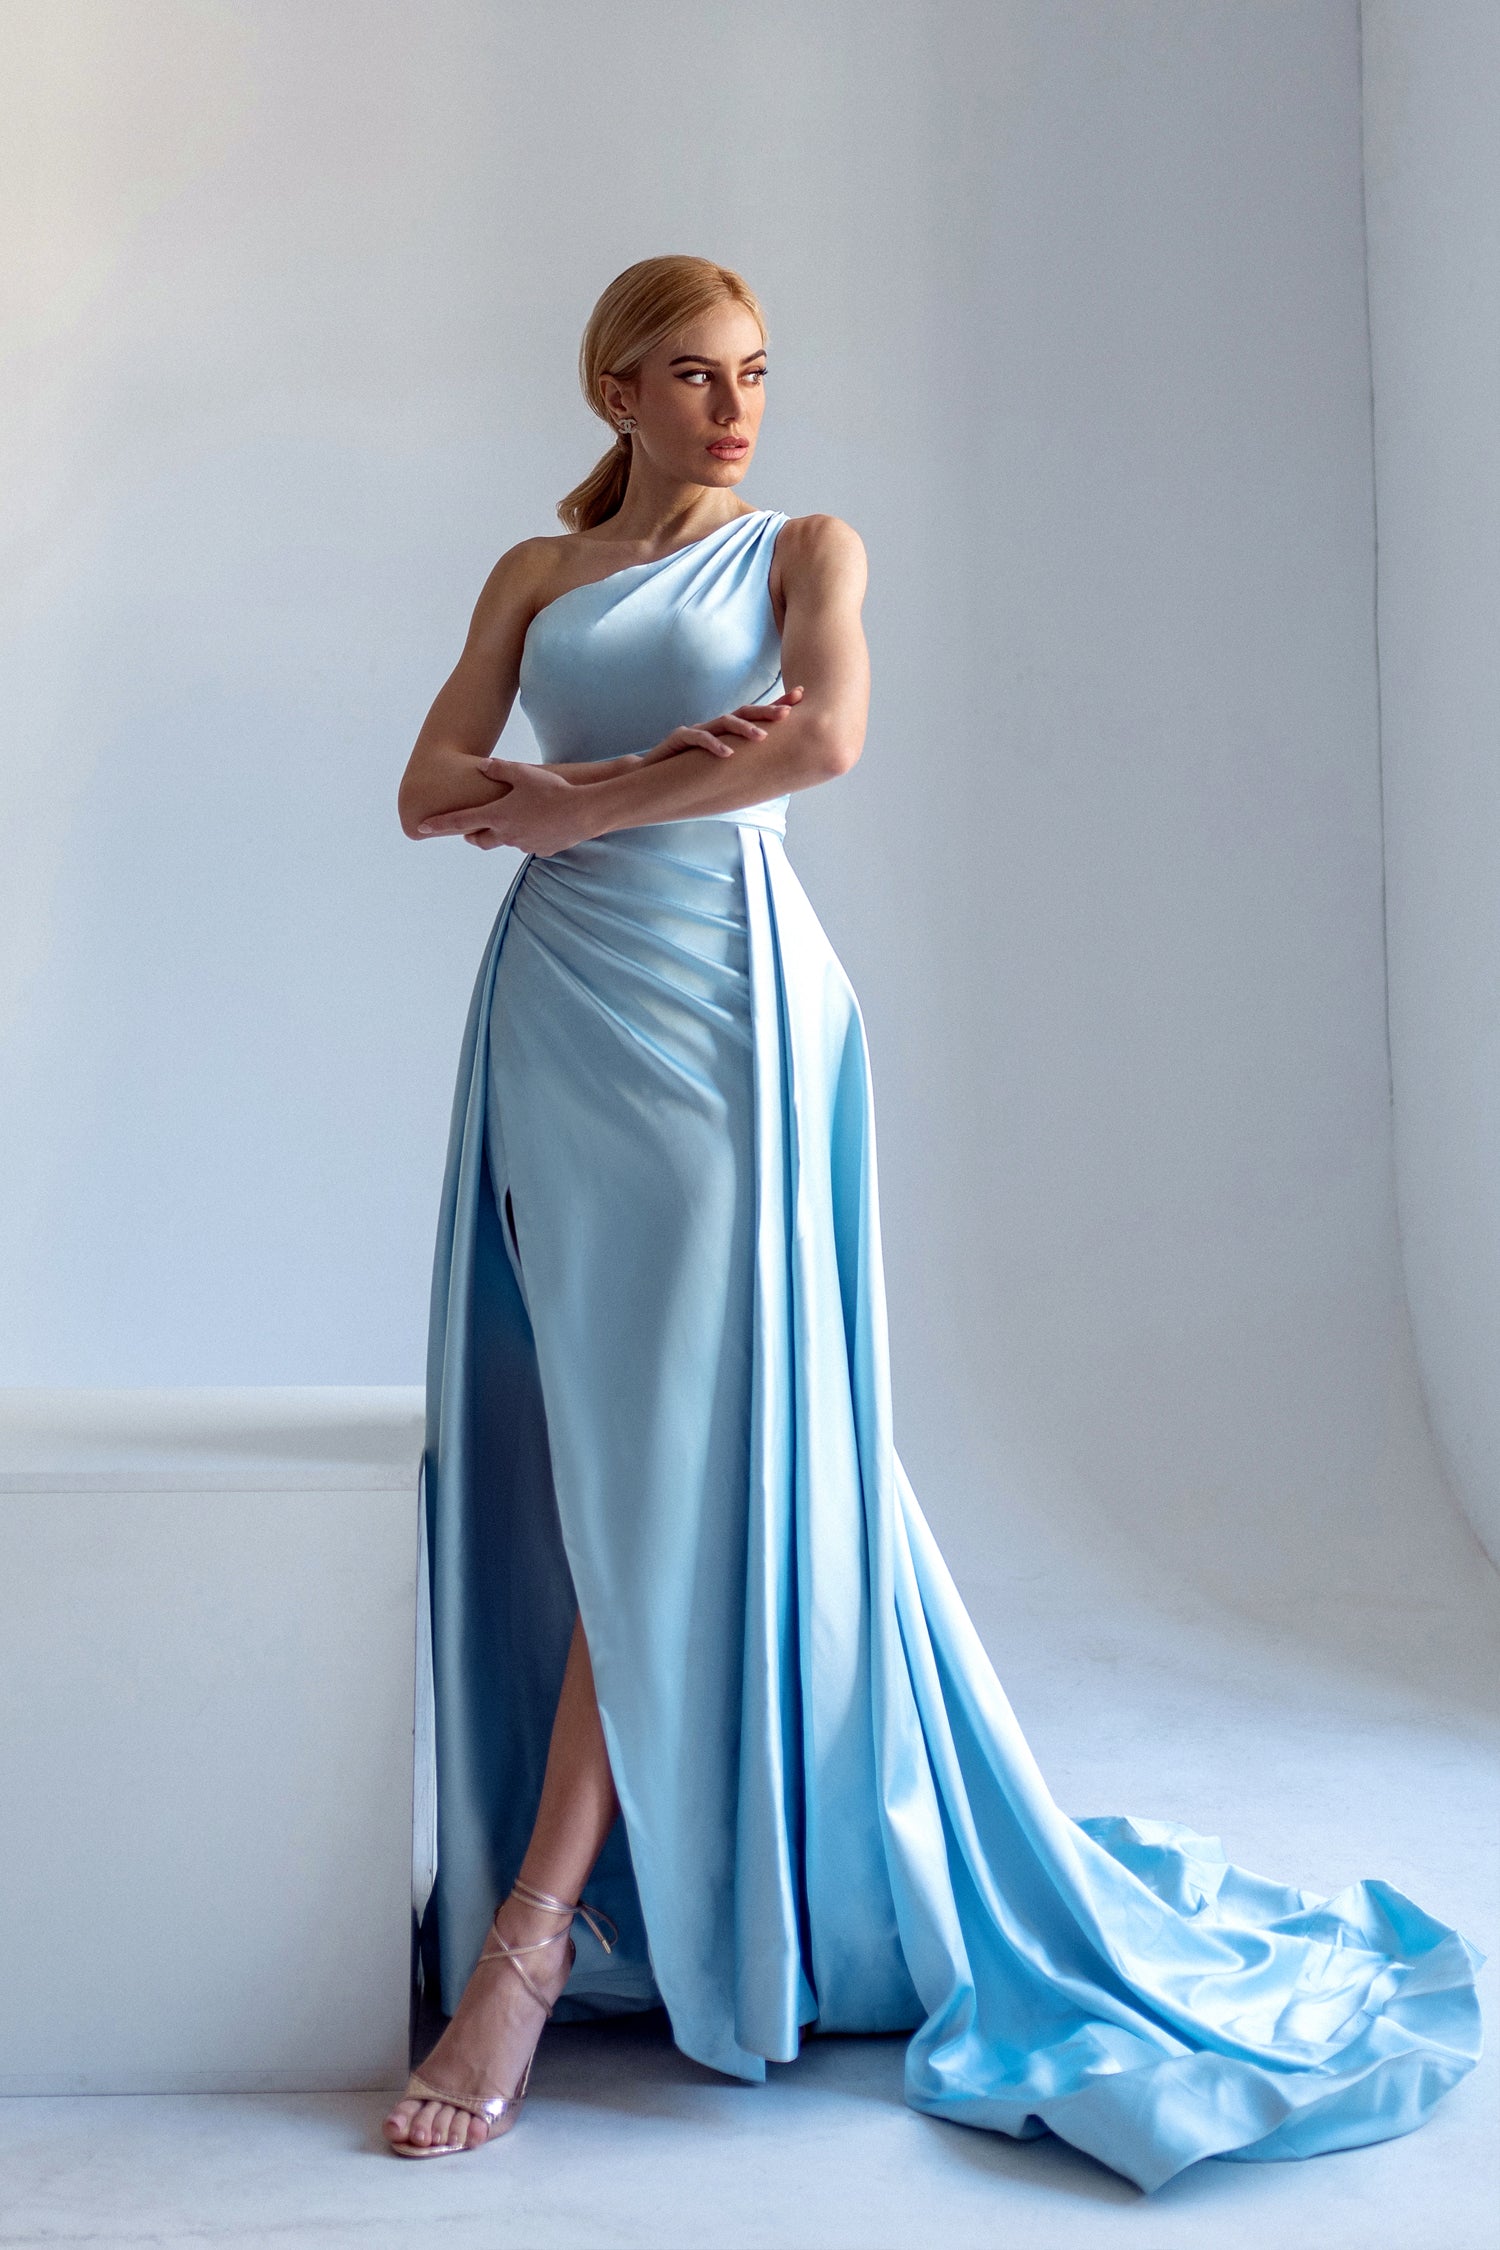 Tina Holly Couture TK888 Ice Blue Silk Satin Asymmetrical Neck Line With A Ruched Side And High Leg Spilt Formal Dress